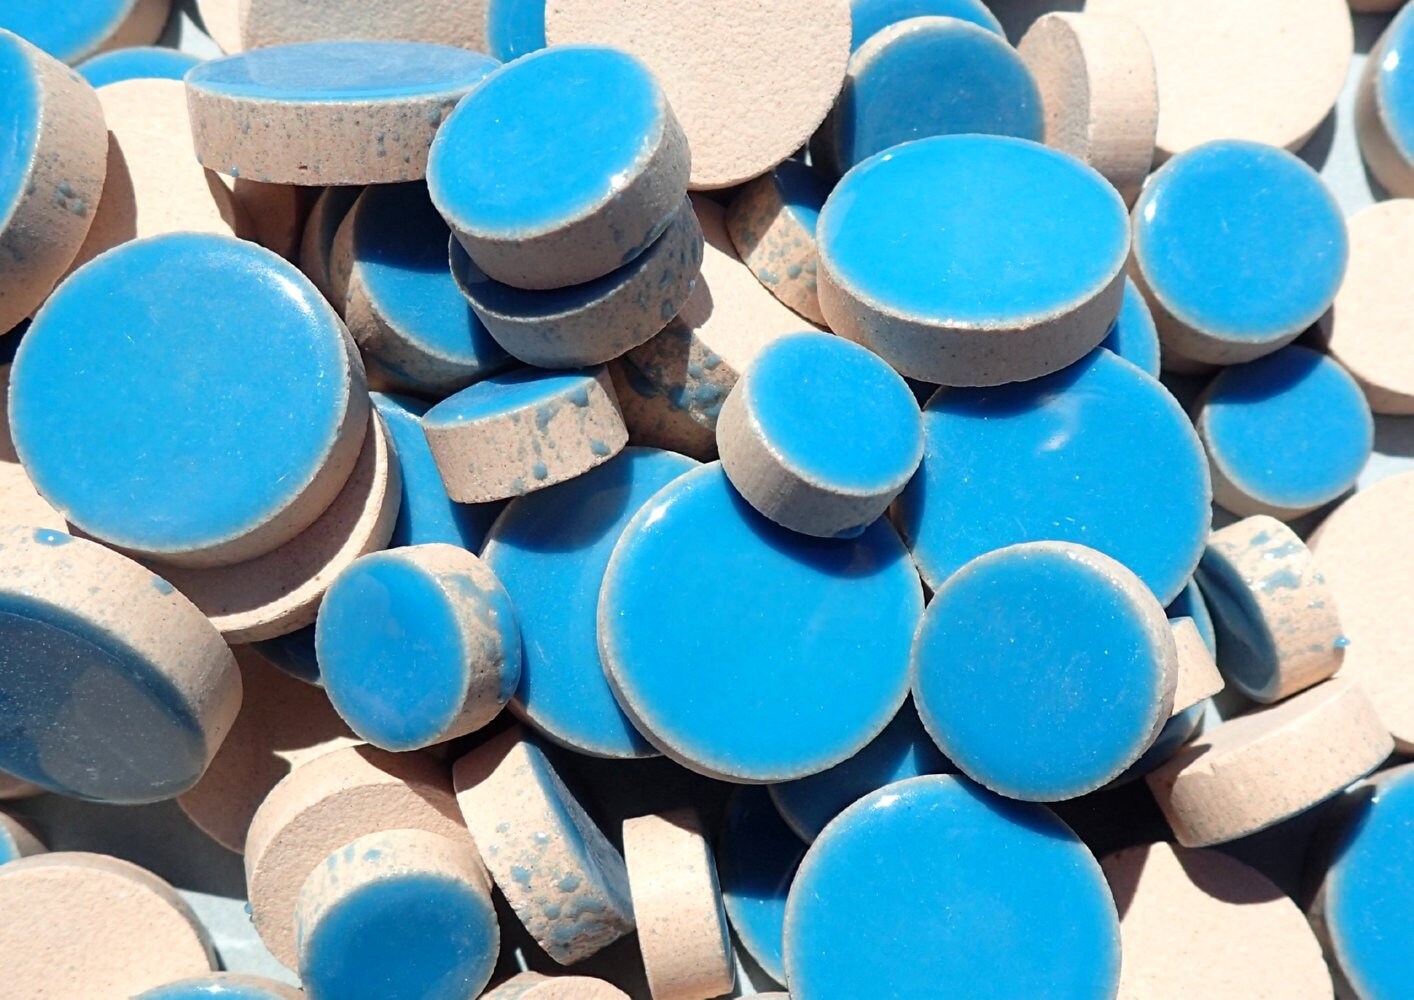 Mediterranean Blue Circles Mosaic Tiles - 50g Ceramic in Mix of 3 Sizes 1/2" and 3/4" and 5/8" in Thalo Blue